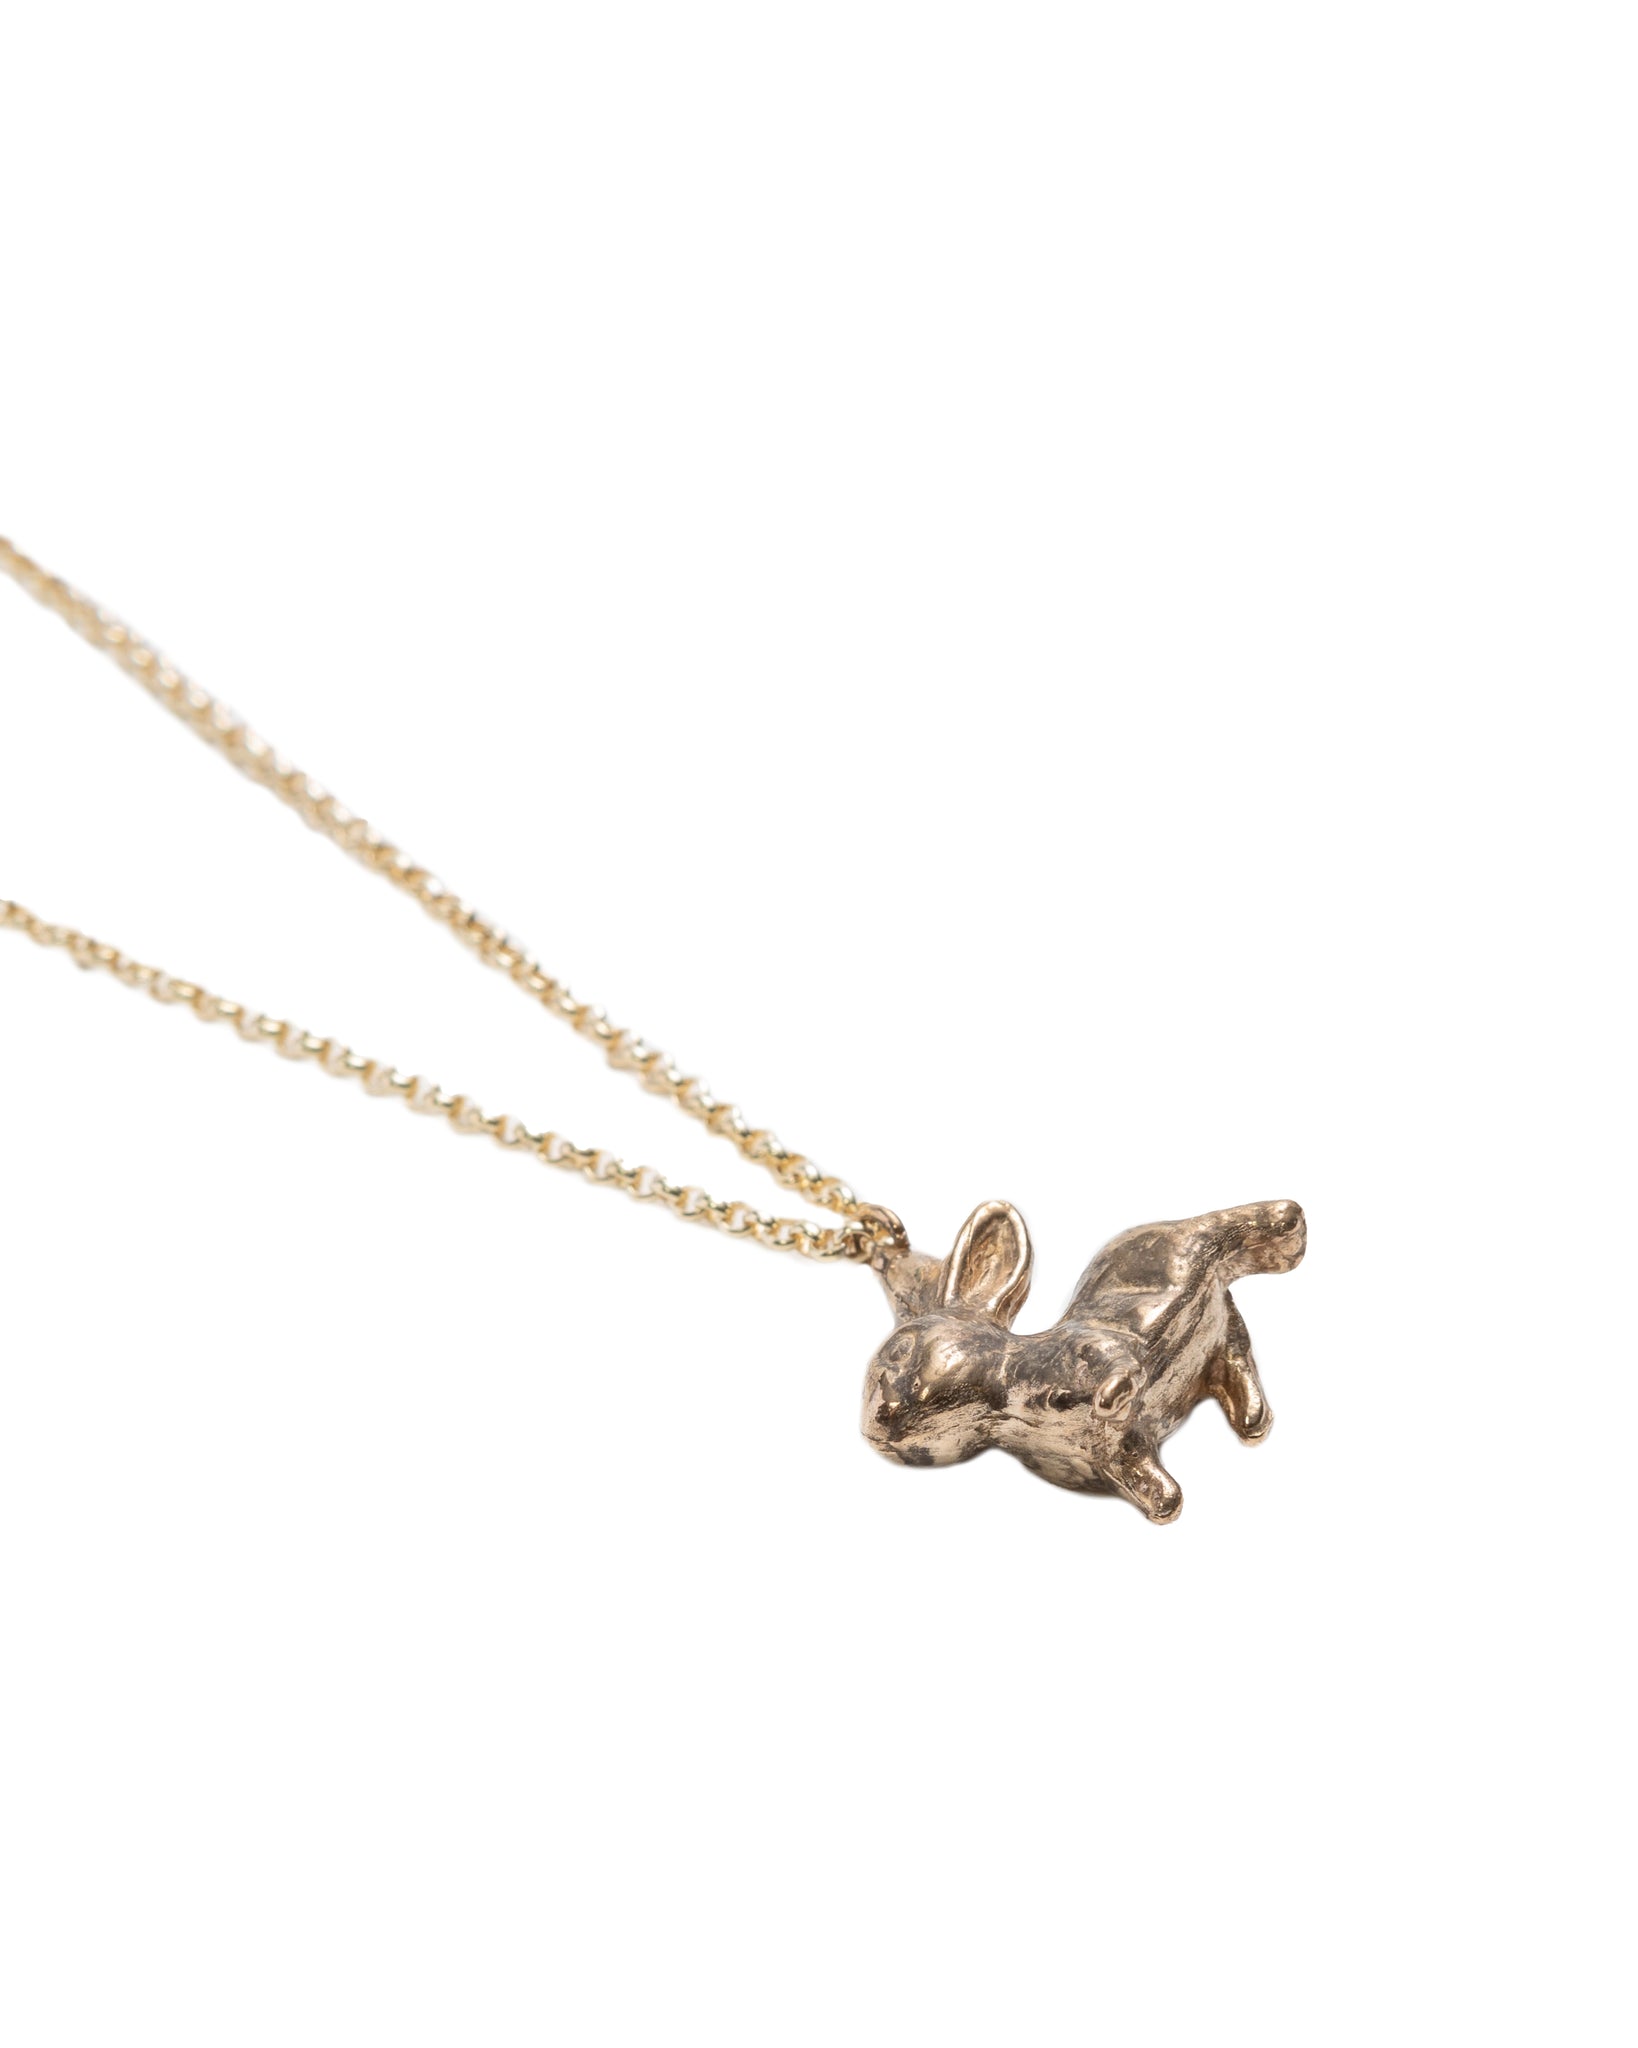 CAT LUCK “Some Bunny” Bronze Necklace